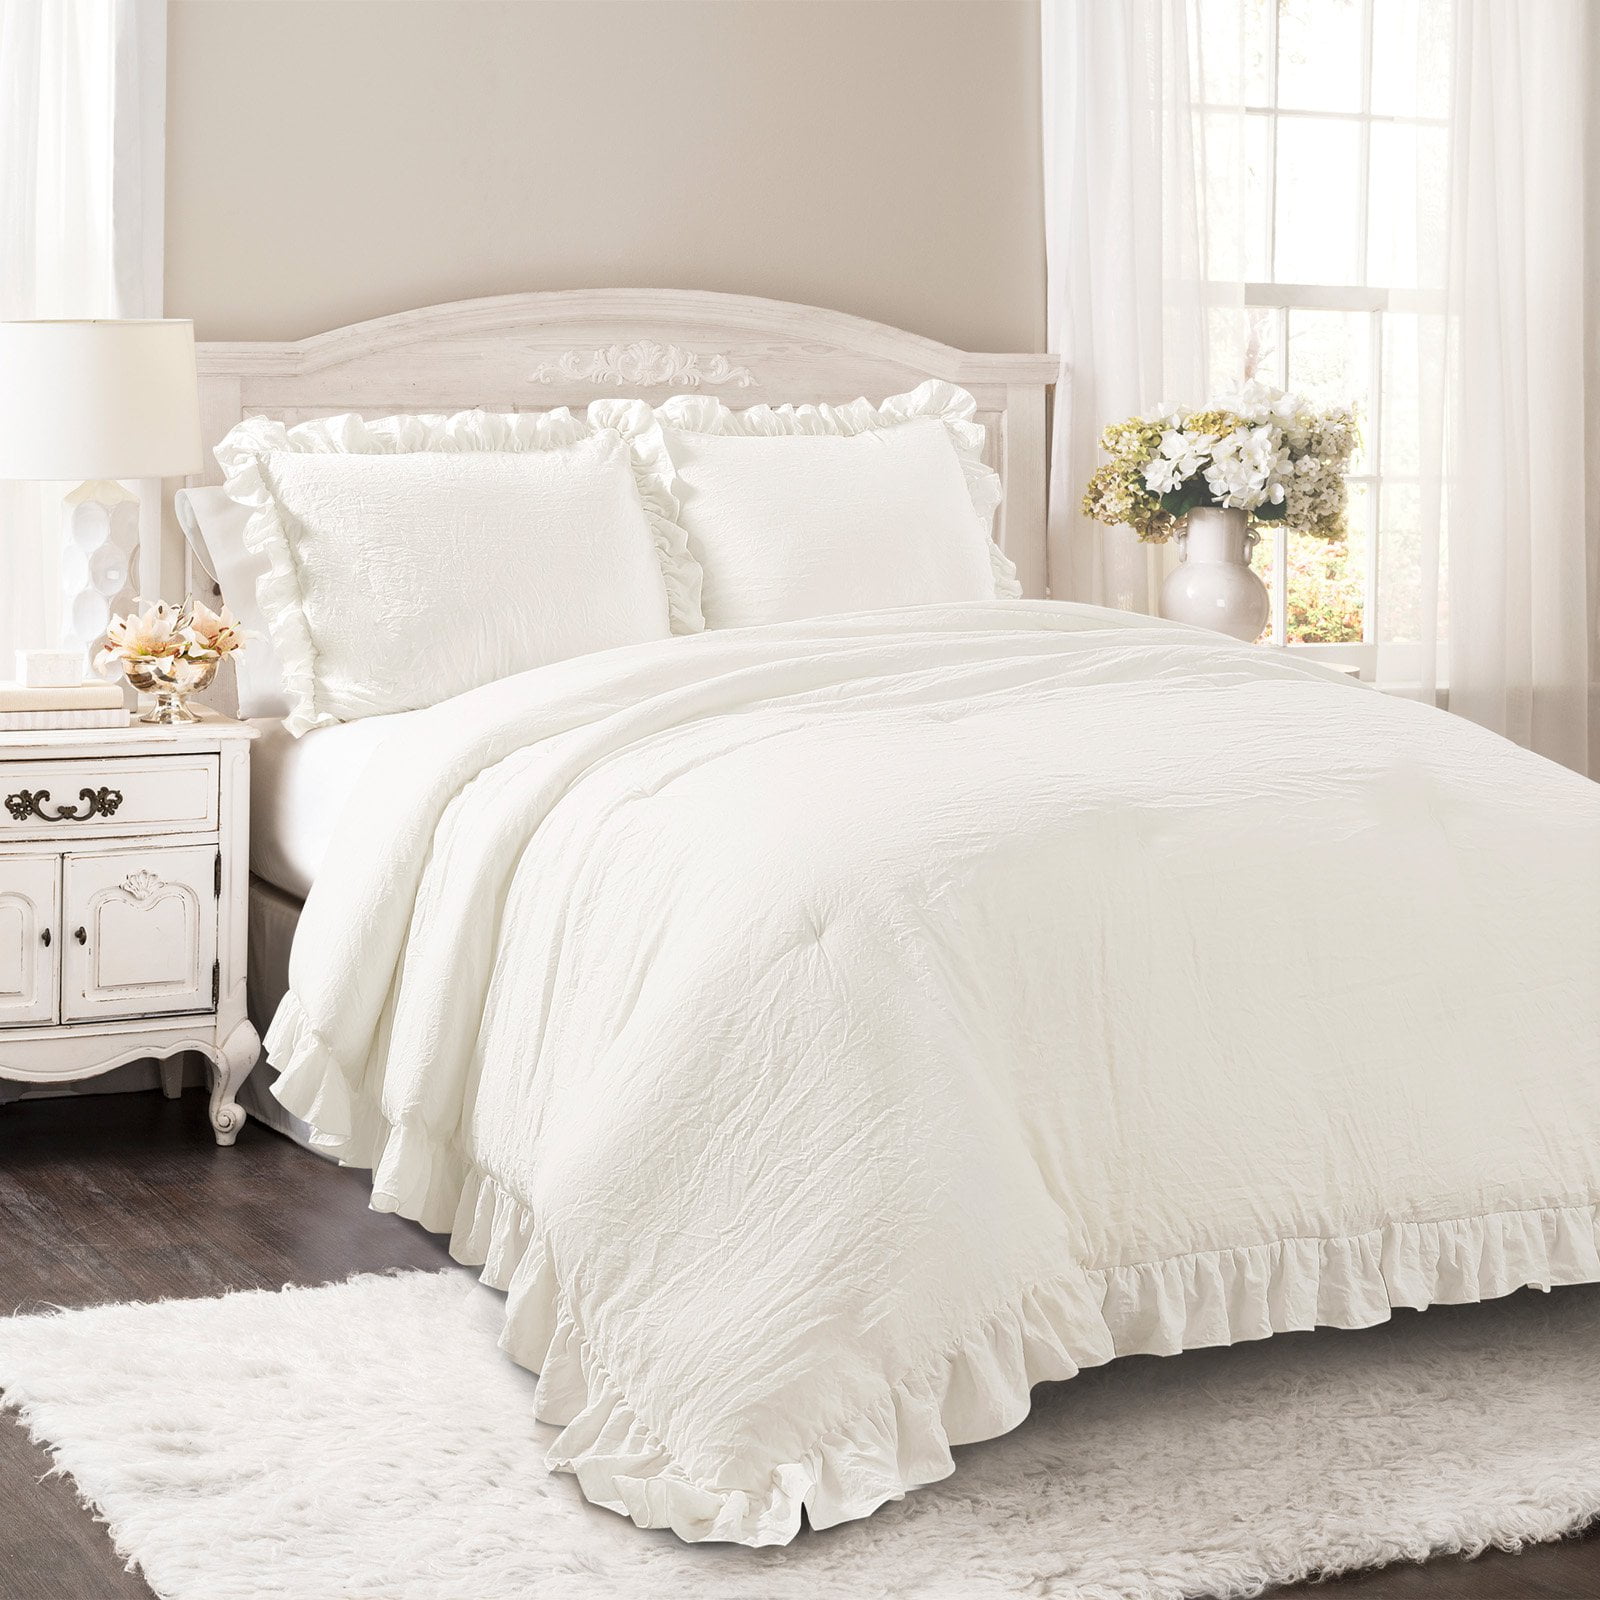 Details about   Lush Decor C07815P13 Belle Ivory Comforter Ruffled Shabby Chic 4 Piece Set with 